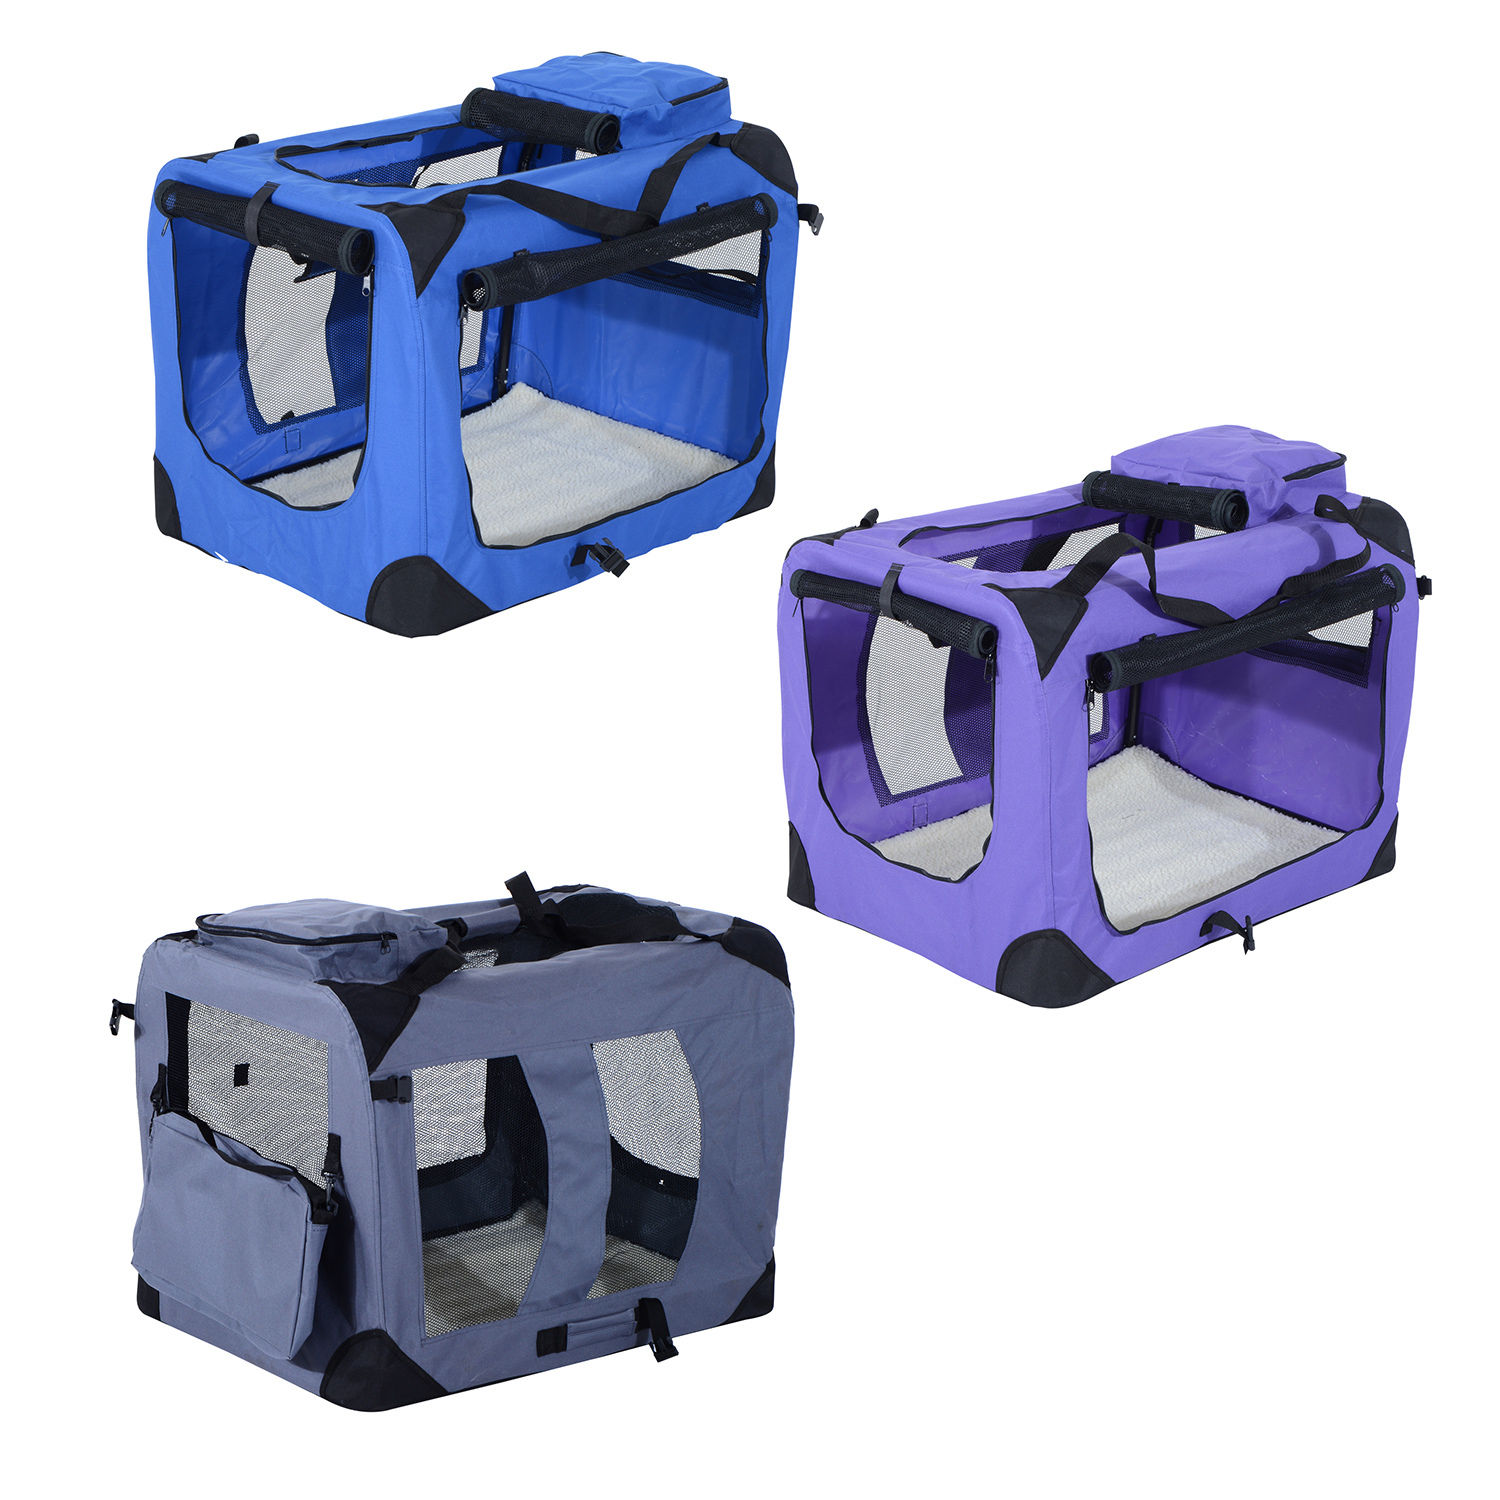 https://wholesaleeventtents.com/wp-content/uploads/2016/09/32-Inch-Soft-Sided-Folding-Crate-Pet-Carrier-Catagory-Image.jpg